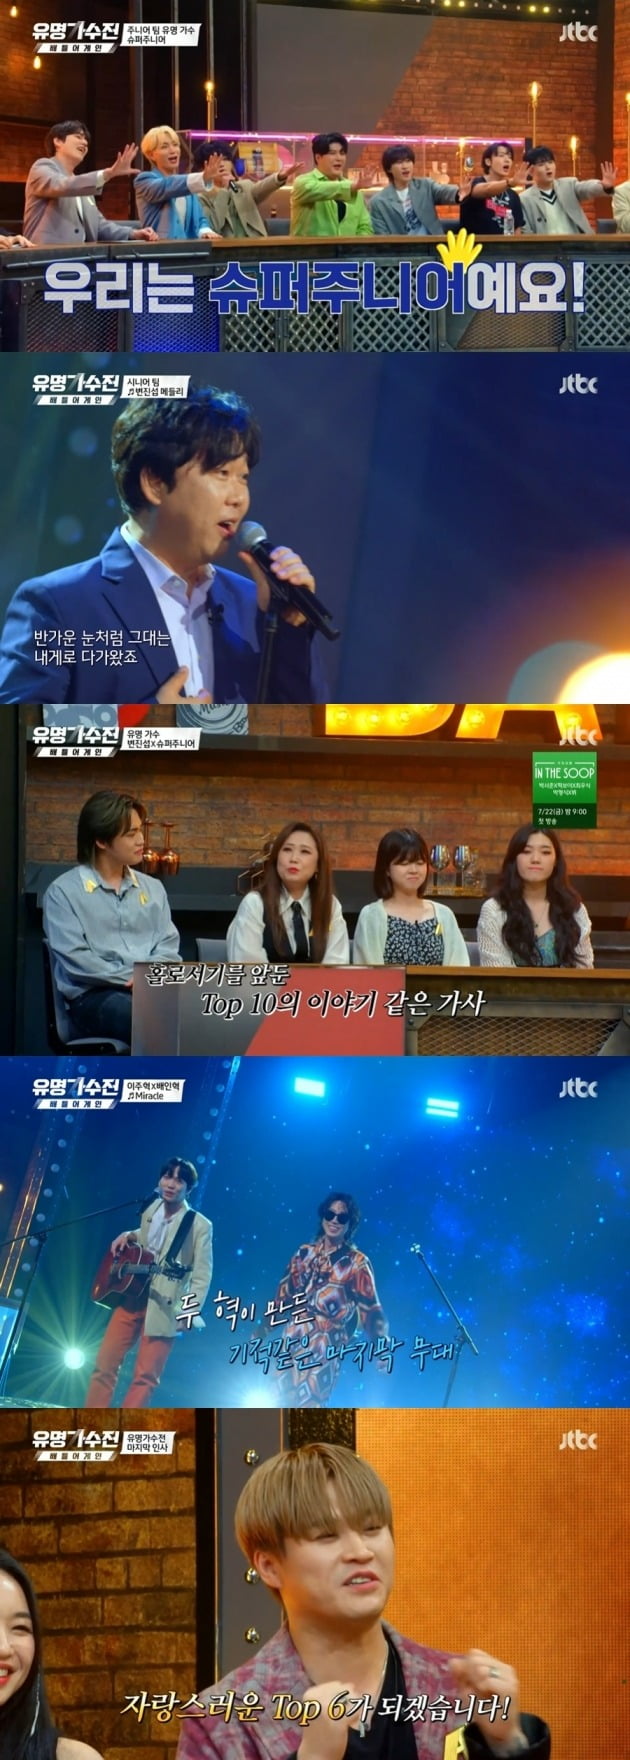 JTBCs Famous Singer - Battle Again finished the final session with 1.6% of TV viewer ratings.In the 12th episode of Celebrity Singers - Battle Again (hereinafter referred to as Celebrity Singers) broadcast on the 15th, Legend singers Byun Jin-sub and Super Junior, who fit the finale, joined the senior team and Junior team respectively.While the game was not conceded until the end, both teams achieved the final score of 6 to 6, and won the trophy side by side.Byun Jin-sub, who opened the door to Celebrity Singers with Again to You on the broadcast, proved Koreas first million-seller singer-down power with a stage where the heart is melted.Super Junior, the representative of the second generation idol, also showed off his unchanging sword dance with the stage of SORRY, SORRY.In particular, MC Cho Kyuhyun boasted the dignity of a Legend singer by showing off his idol side.Yoon Sung and Shin Yumi, who finished second in the first one-on-one battle, played a strong battle.Shin Yumi arranged Super Juniors Devil in R & B style, showing her the music world to unfold.Yoon Sung, who was determined to pour everything out, held a deep catharsis through being alone.On her stage, which crossed the overwhelming high note, the original song Byun Jin-sub praised her for saying, This seems to be the end of her life.Yoon Sung, a senior team in Battle of R & B and rock ballads, took the runners-up spot with victory.In the second one-on-one Battle, Kim Ki-tai and Park Hyun Kyu continued their last-place game, adding to the interest.First, Park Hyun Kyu expressed delicately the beautiful lyrics of All I can give you is love and wanted to give a message of support to the listeners.Kim Ki-tai then took the badge while moistening the scene on the stage at Gwanghwamun, adding his own sadness, and at the Byun Jin-sub ship Ballard Prince, Park Hyun Kyu tasted the joy of being named successor.So, as I was running toward the last Battle, a special time came: the famous song medley of Byun Jin-sub and Super Junior.The stage filled with deep resonance and charisma of the hit song chaebols warmed up the Battle atmosphere.Only the 2-2 curler Battle, who has won and lost the final winner, including the final winner.Senior team Kim So-yeon and the clerk of Season 2 of Singer Gain - Unknown Singers gathered together to sing Like Birds and present the freedom to fly with a fresh melody.Finally, Junior team Lee Joo-hyuk and Singer Gain - Unknown Singer Season 2 Bae In-hyuk set the ending stage.Their stage, which released soft energy with Super Juniors Miracle, sounded everyones hearts like a miracle.In the close match between Kim So-yeon, the first-place candidate for steel, and Lee Jo-hyuk, the first-place candidate for anti-war, Lee Jo-hyuk, won the badge and caused the last rebellion.After all Battle ended, TOP 6 finished the long journey and left the last greeting.Shin Yu-mi said, I am grateful that I could learn how to live and play music in the future. Lee Jo-hyuk said, The stage was not a comfortable person, but I was able to sing with my heart on stage.In particular, Kim Ki-tai promised to grow in the future, saying, I will be proud of my graduation from famous singer.